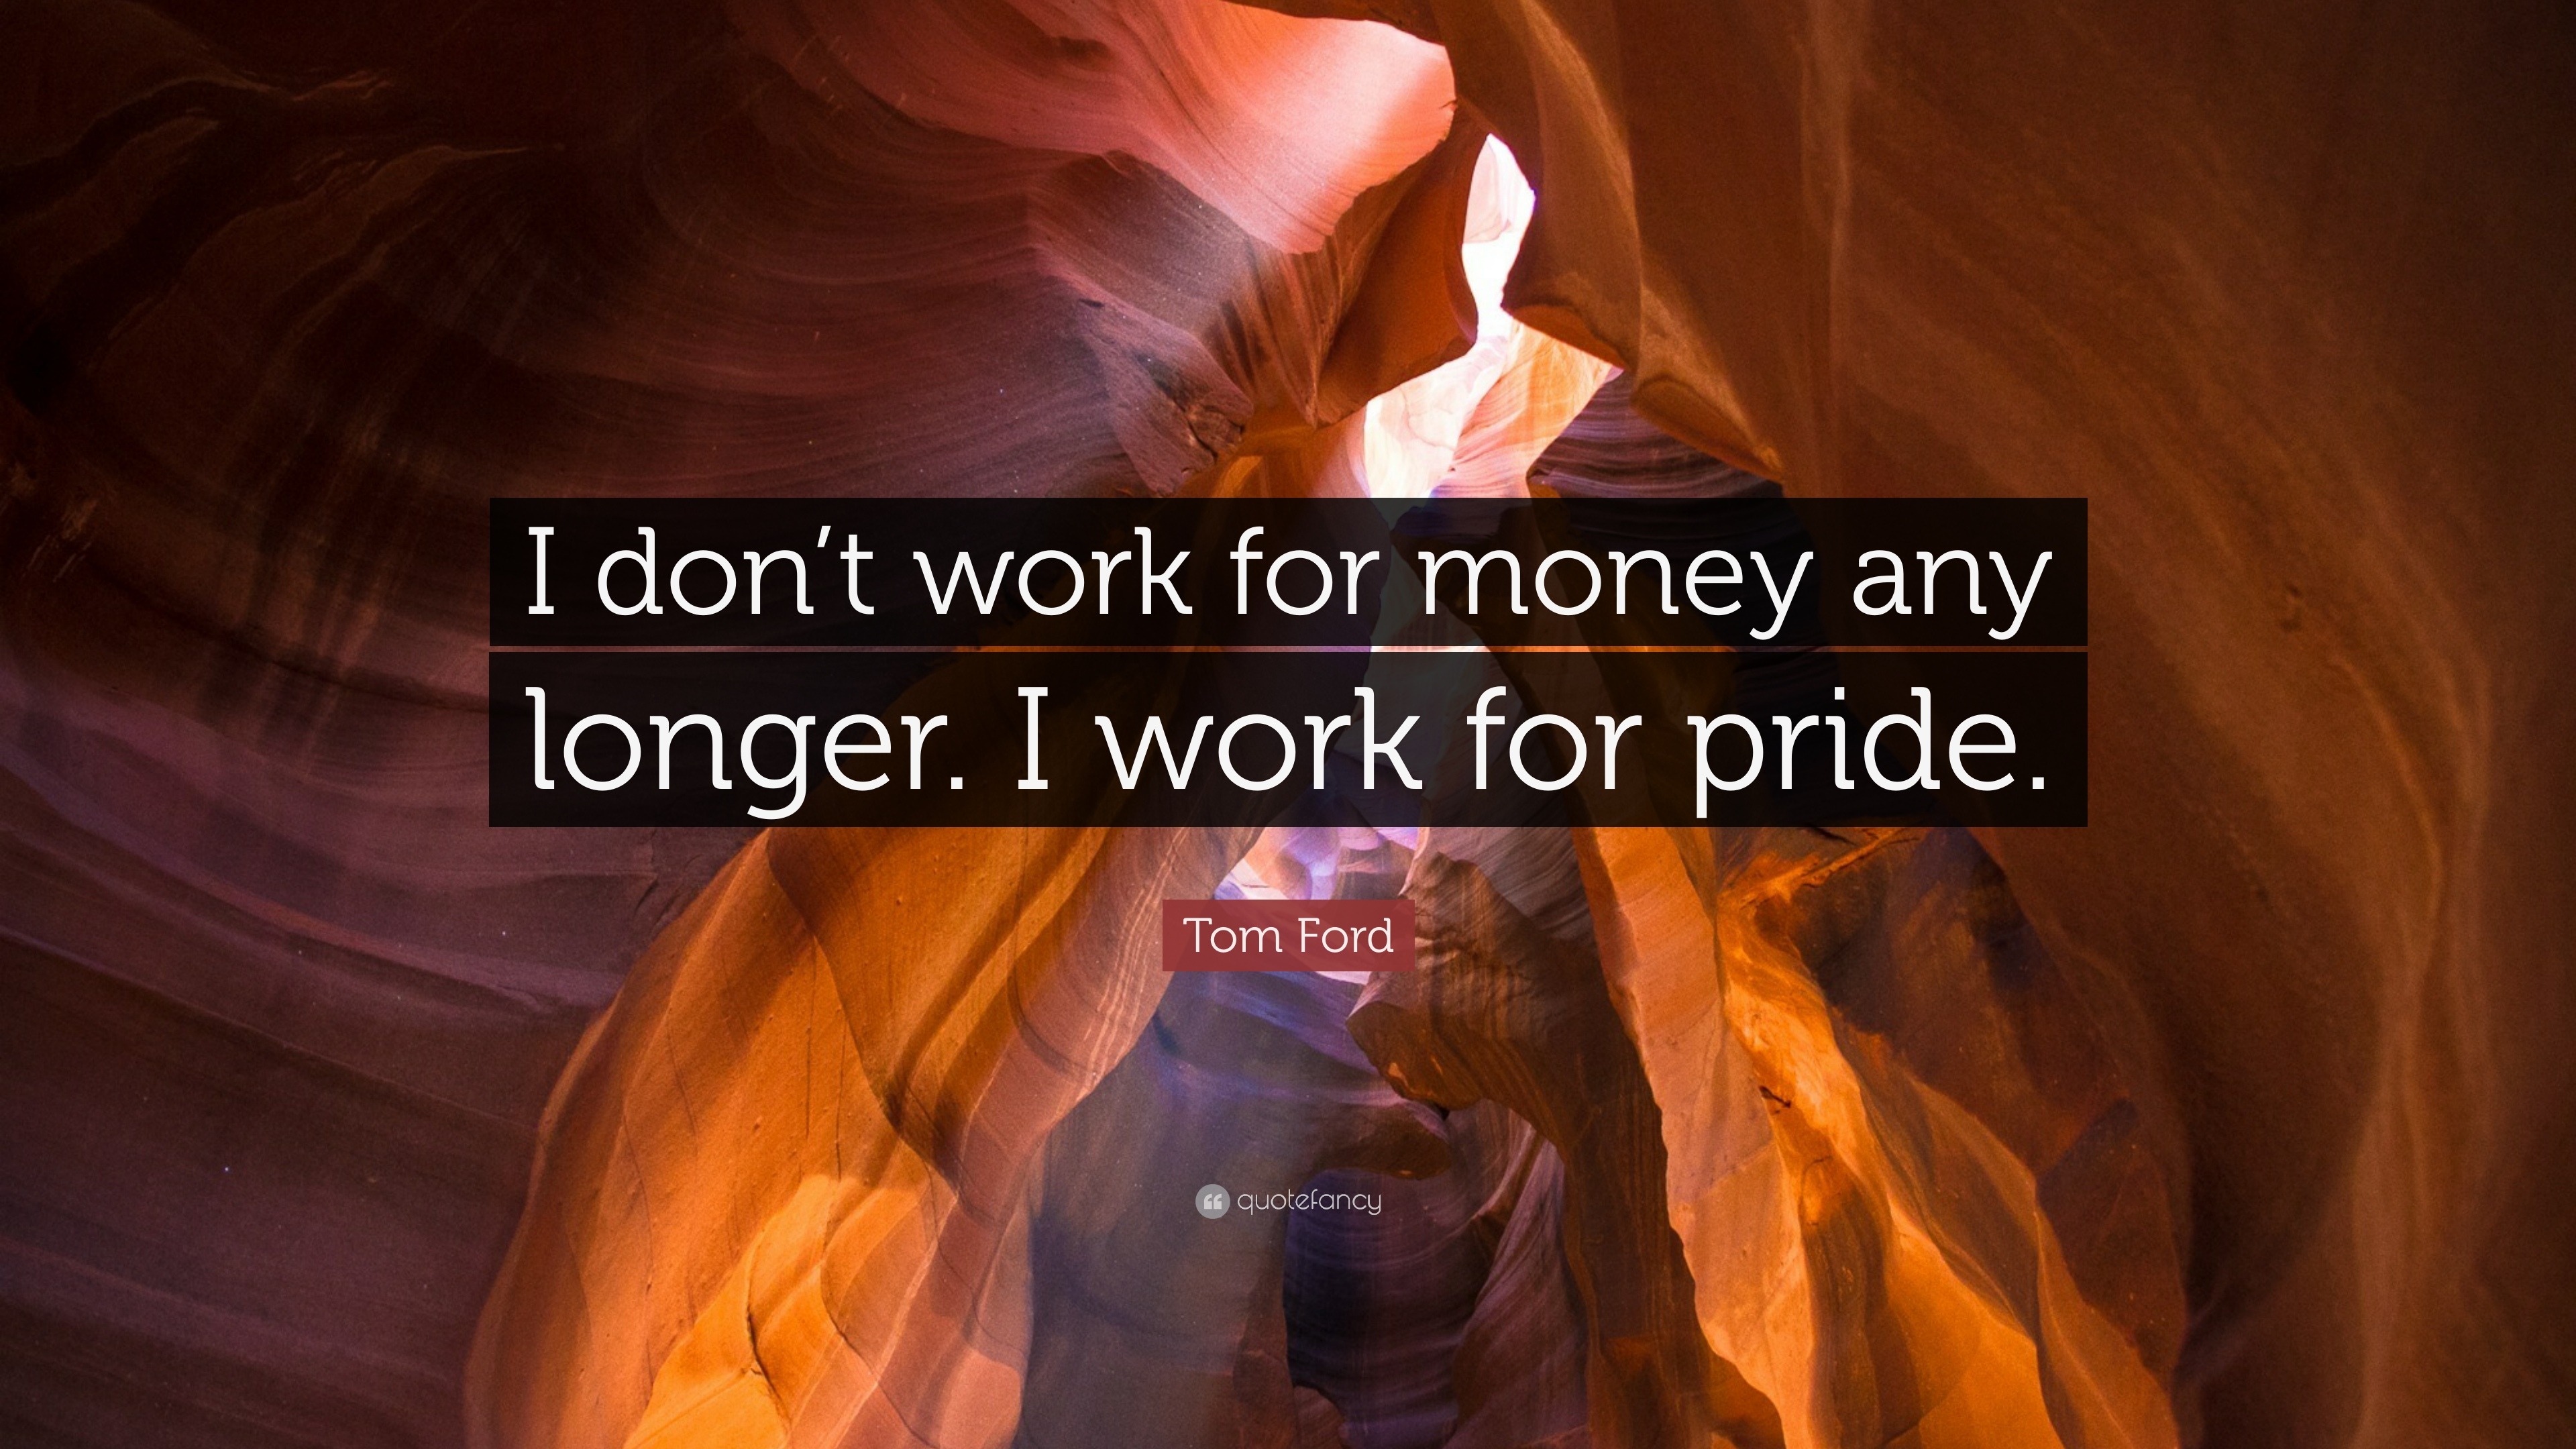 Tom Ford Quote: “I don't work for money any longer. I work for pride.”